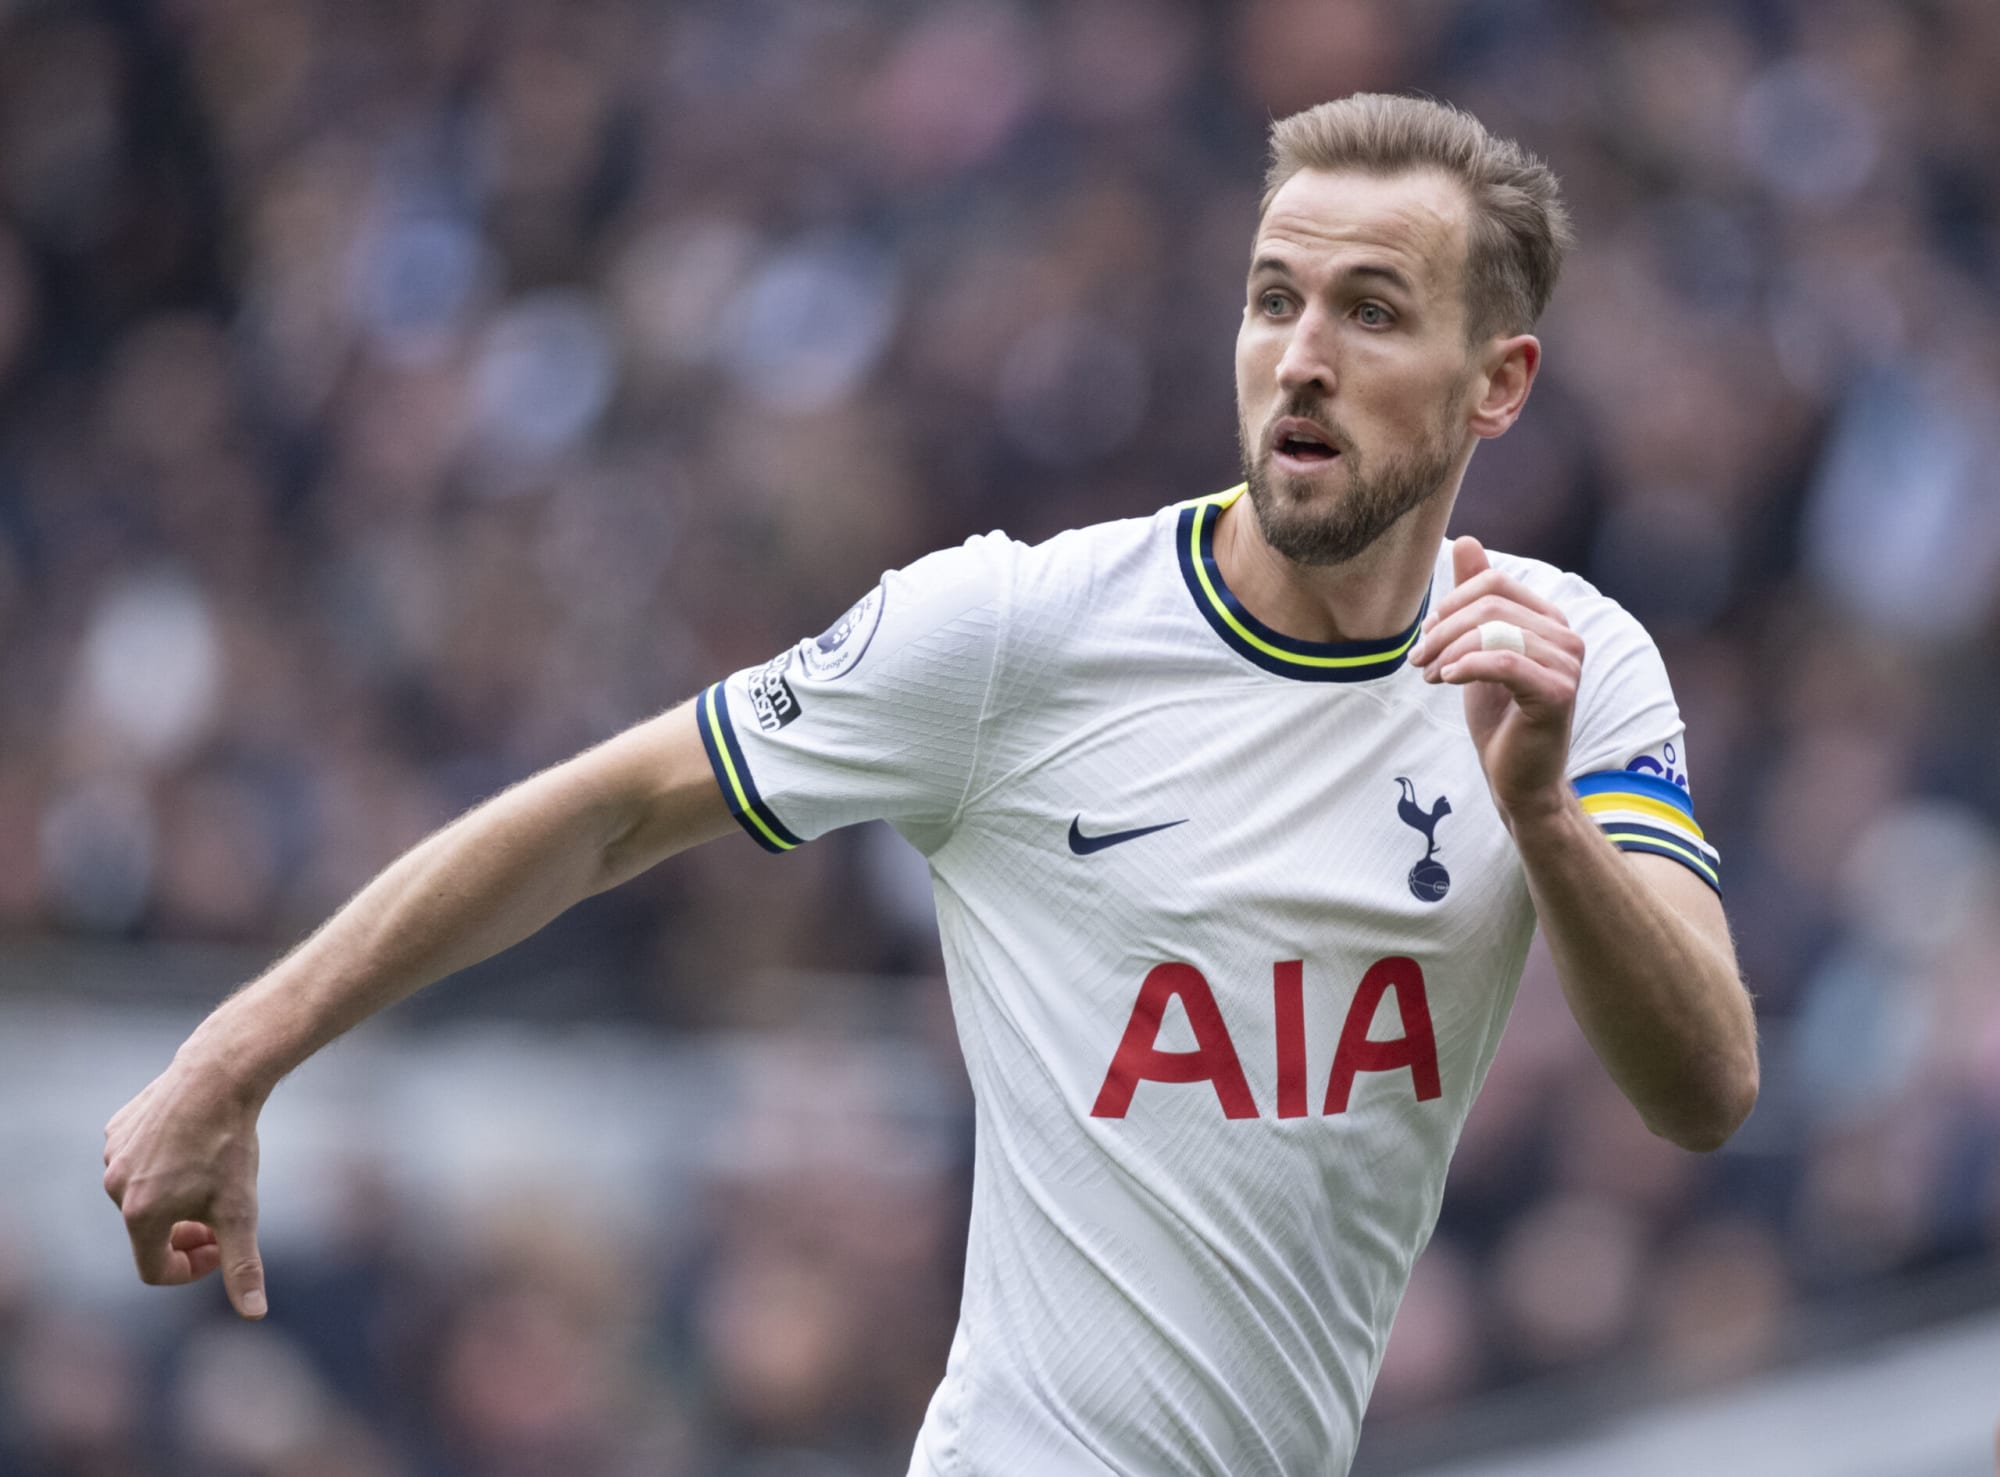 Spurs chairman has no intention of dealing with Chelsea for star signing